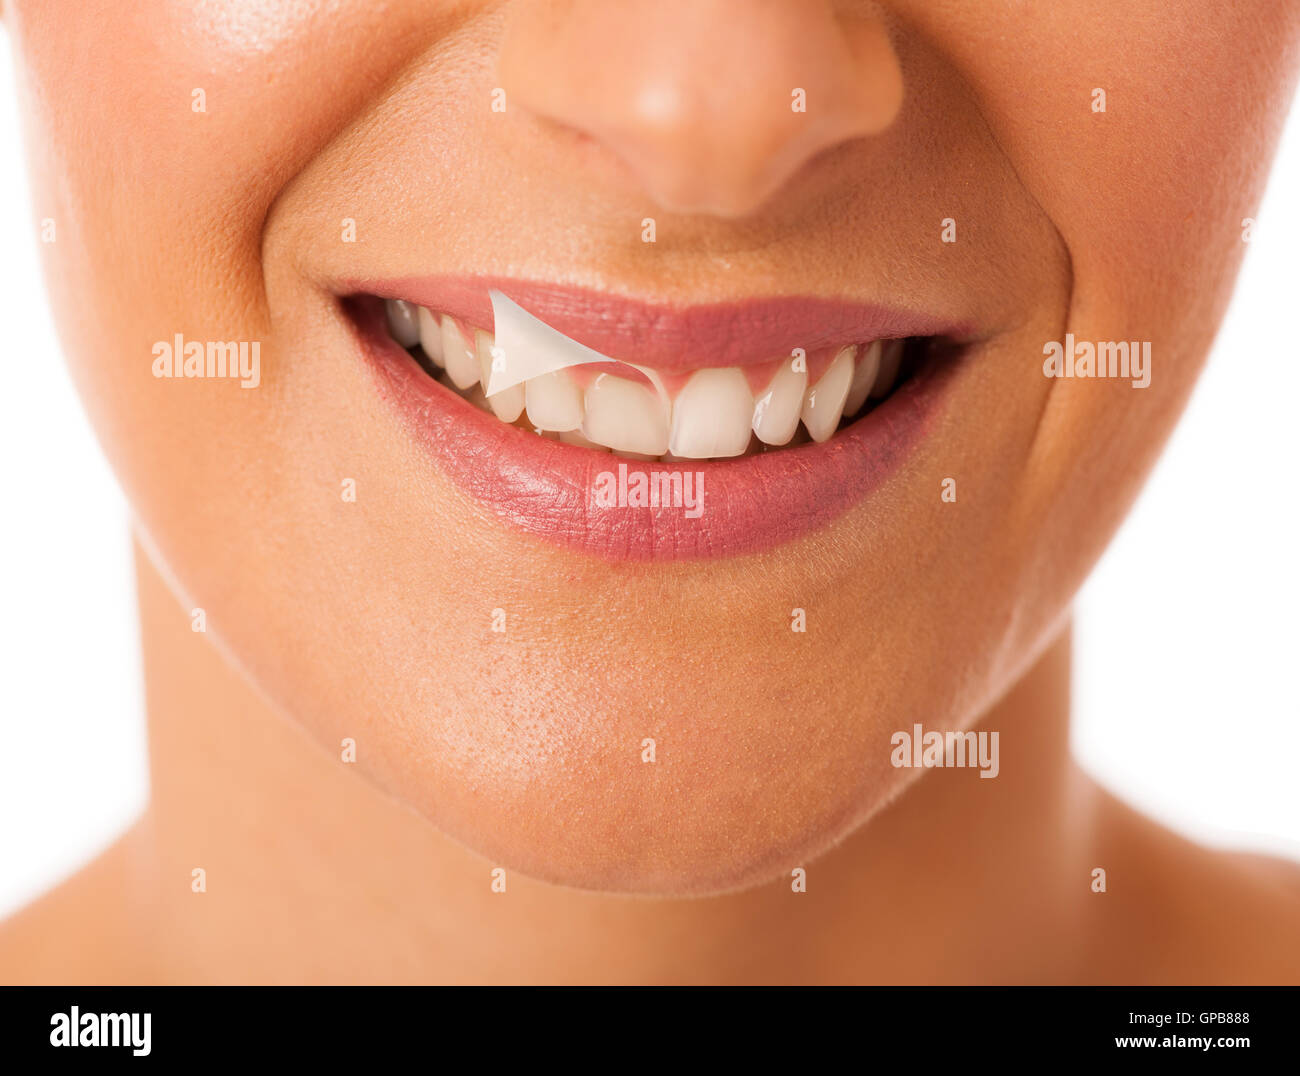 Clean healthy white teeth of smiling happy woman. Stock Photo